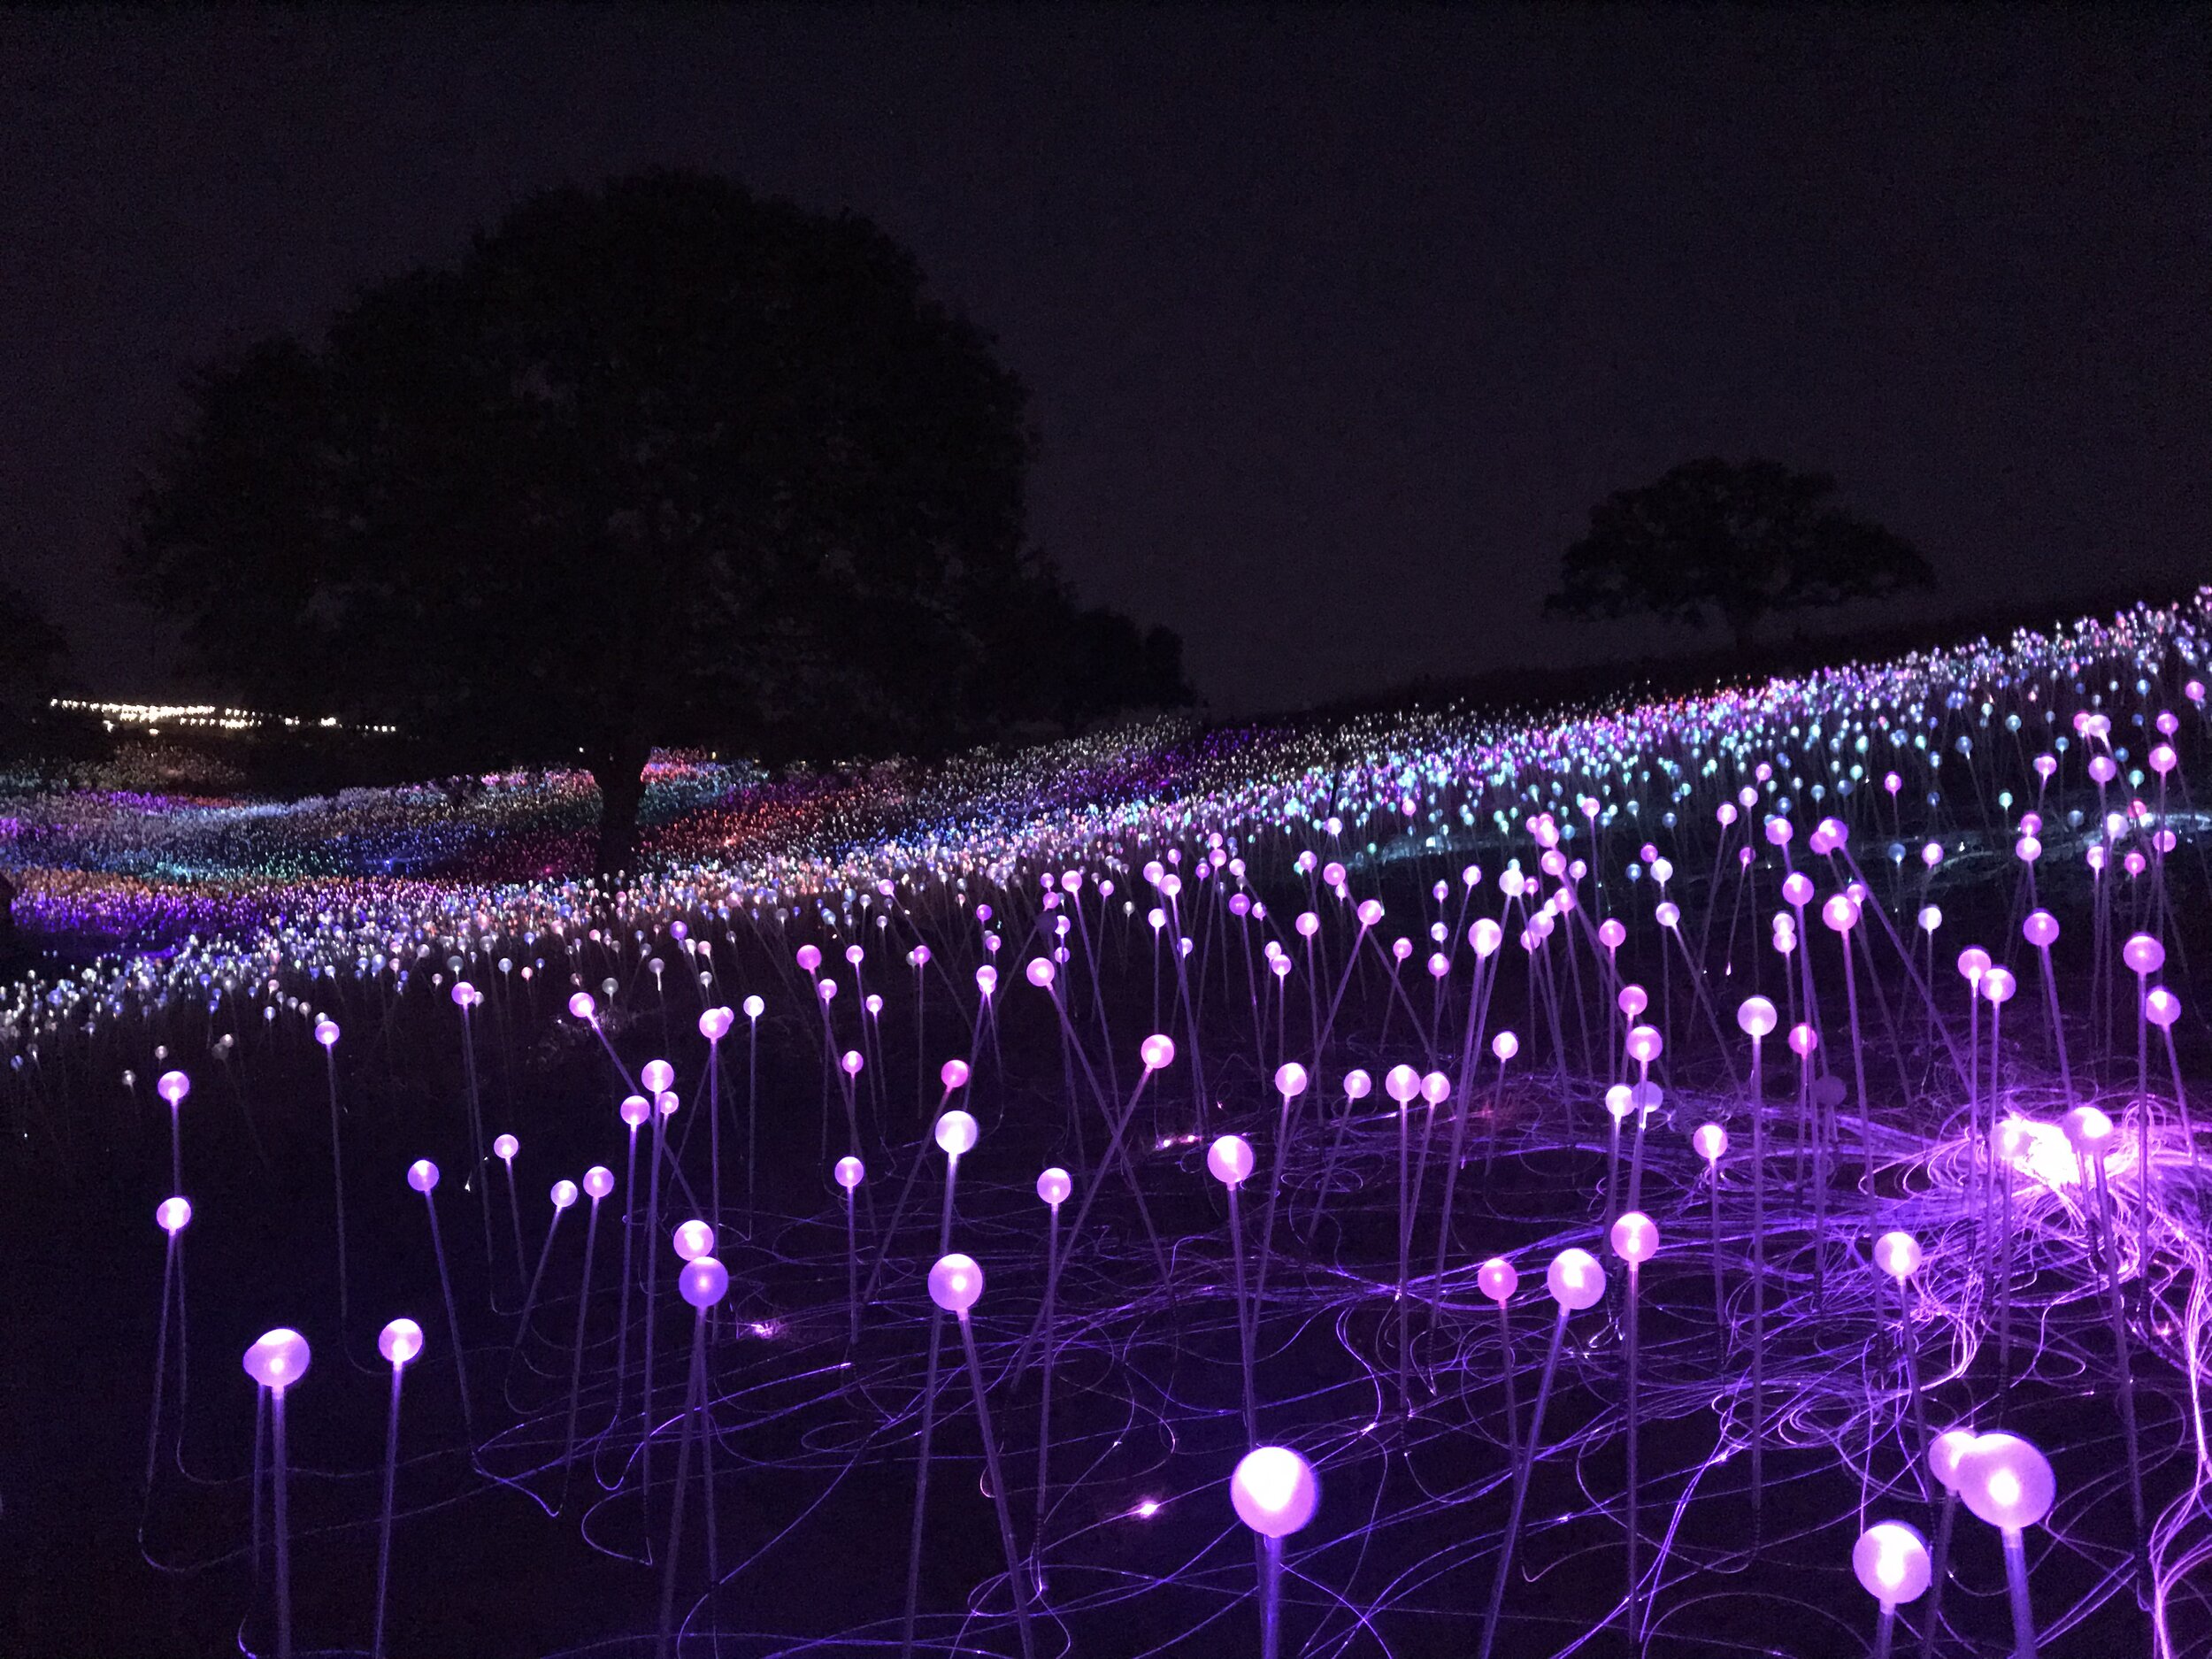 “A Field of Light” by Bruce Munro at Sensorio